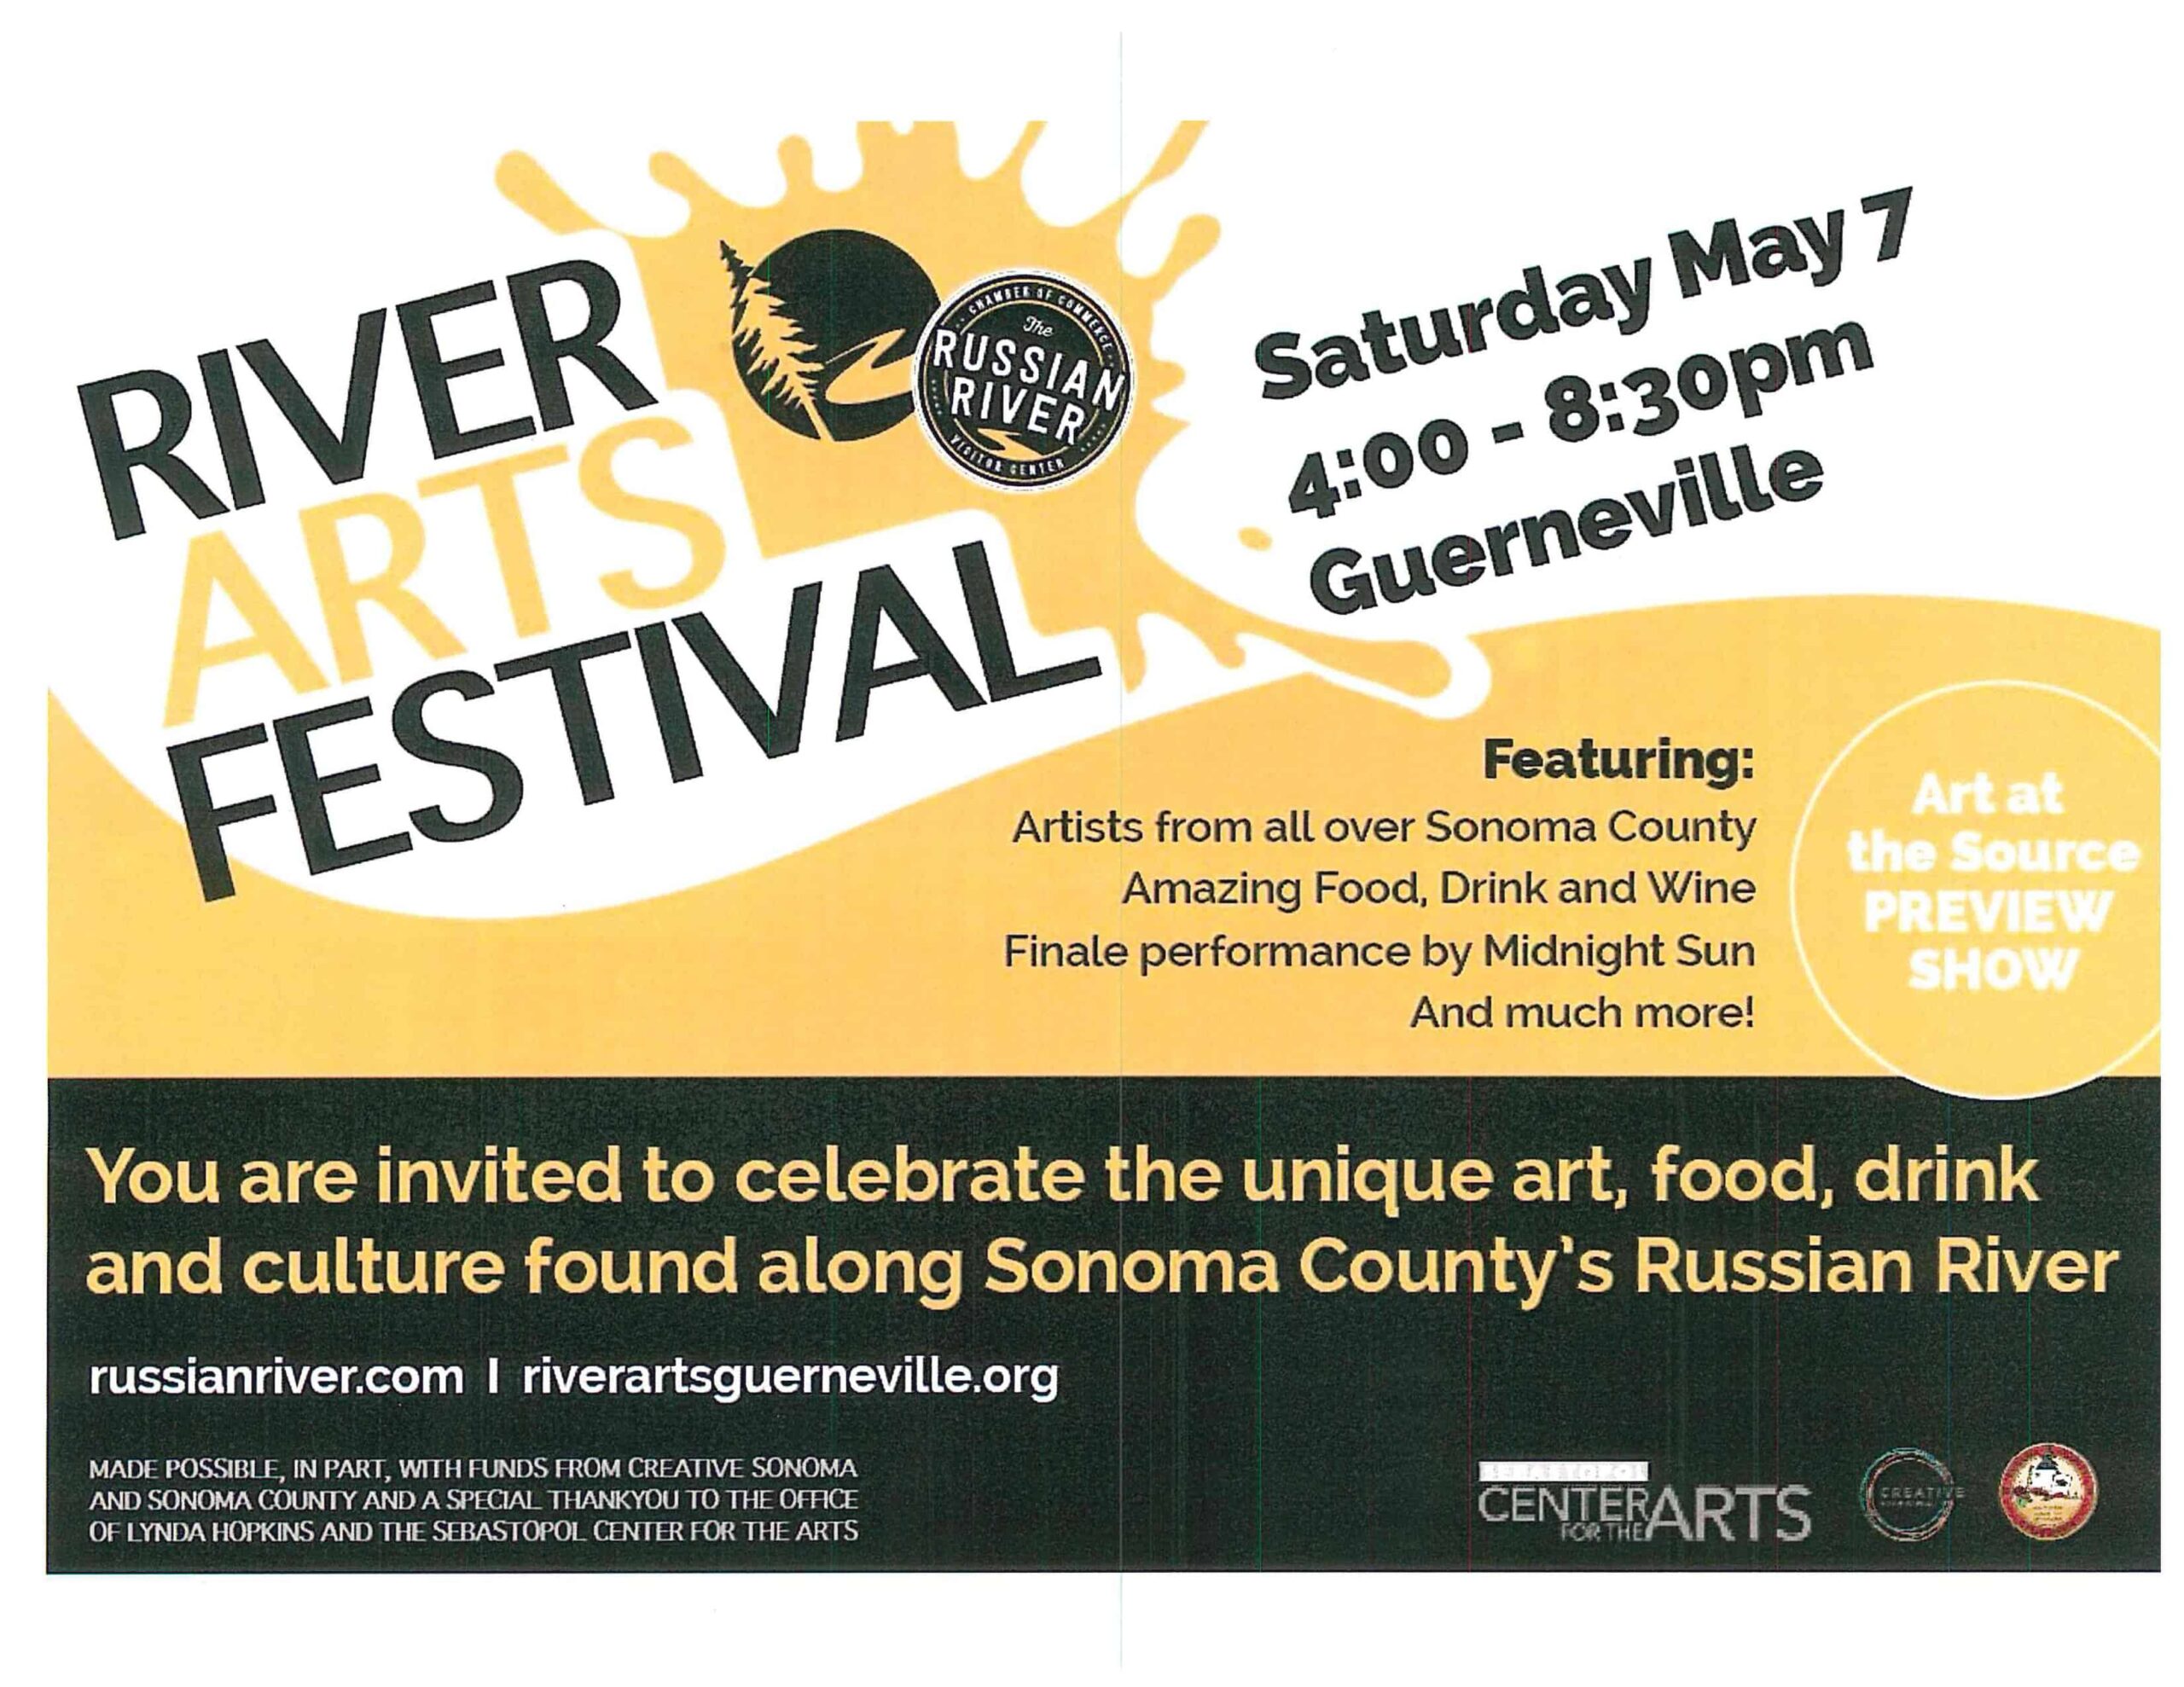 River Arts Festival and Art at the Source Preview Show